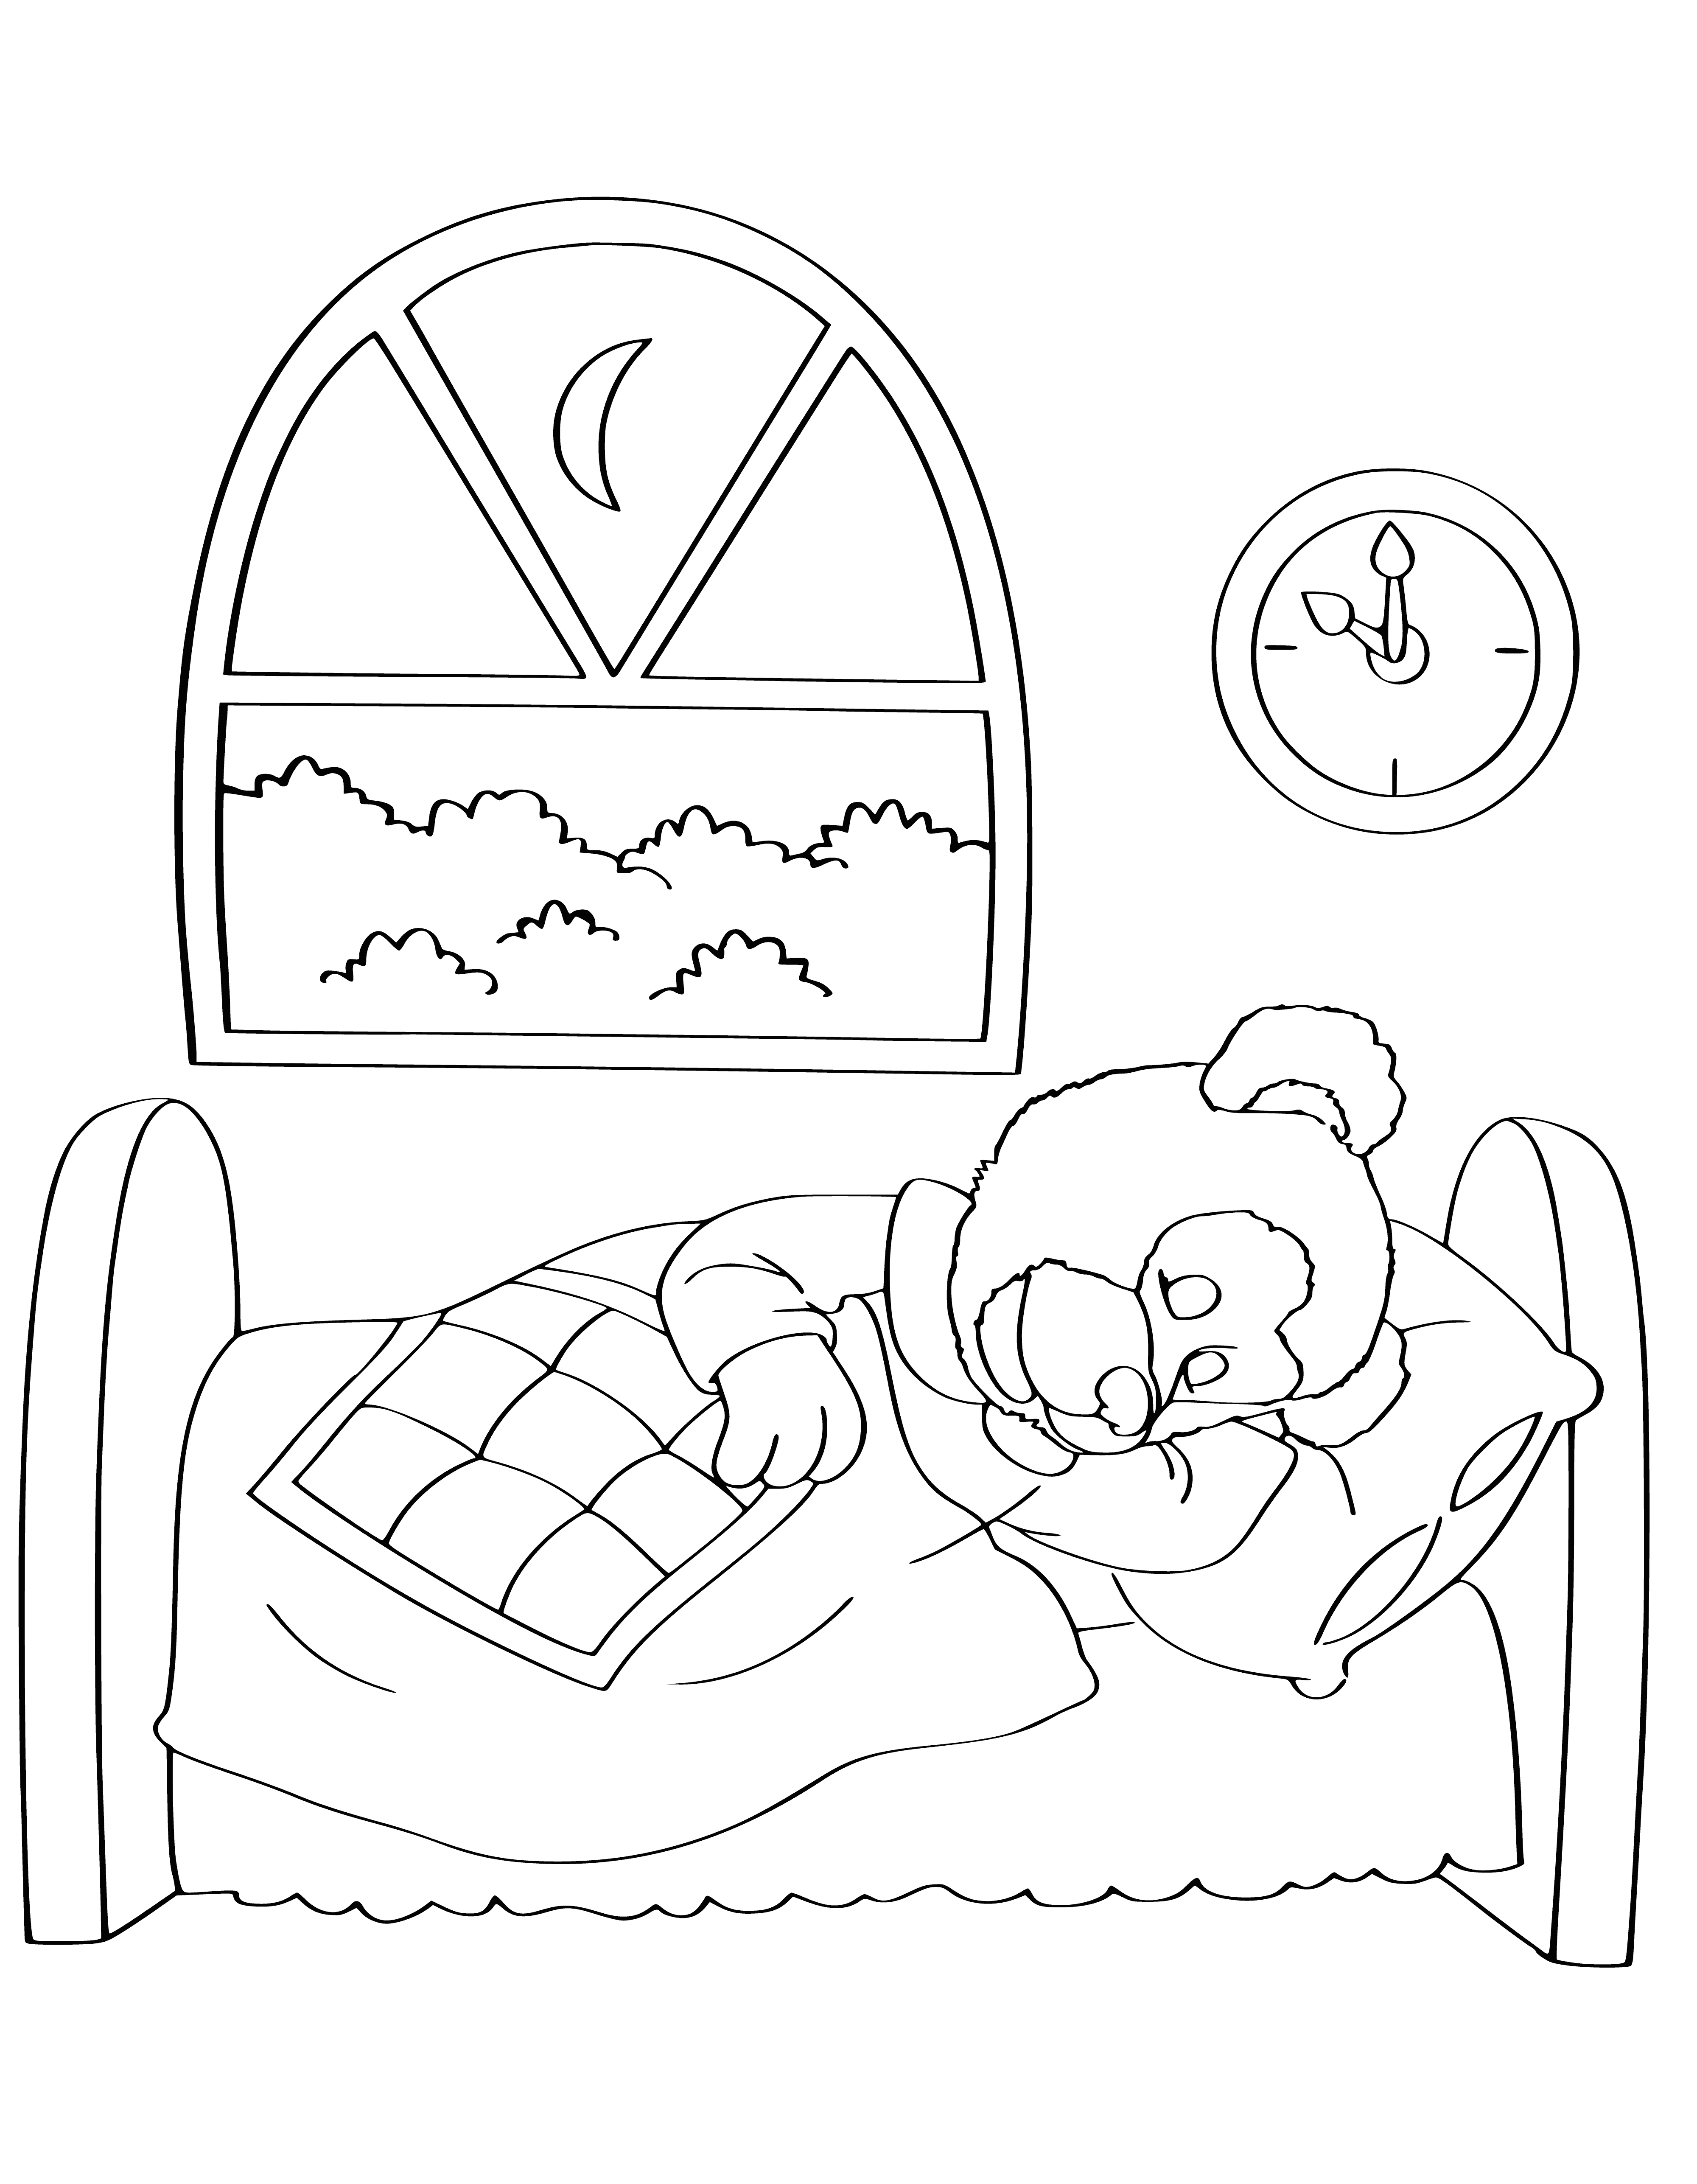 coloring page: Girl says goodnight to two children holding a candle with dimly lit room, clock on wall shows it's almost midnight. #ColoringPage